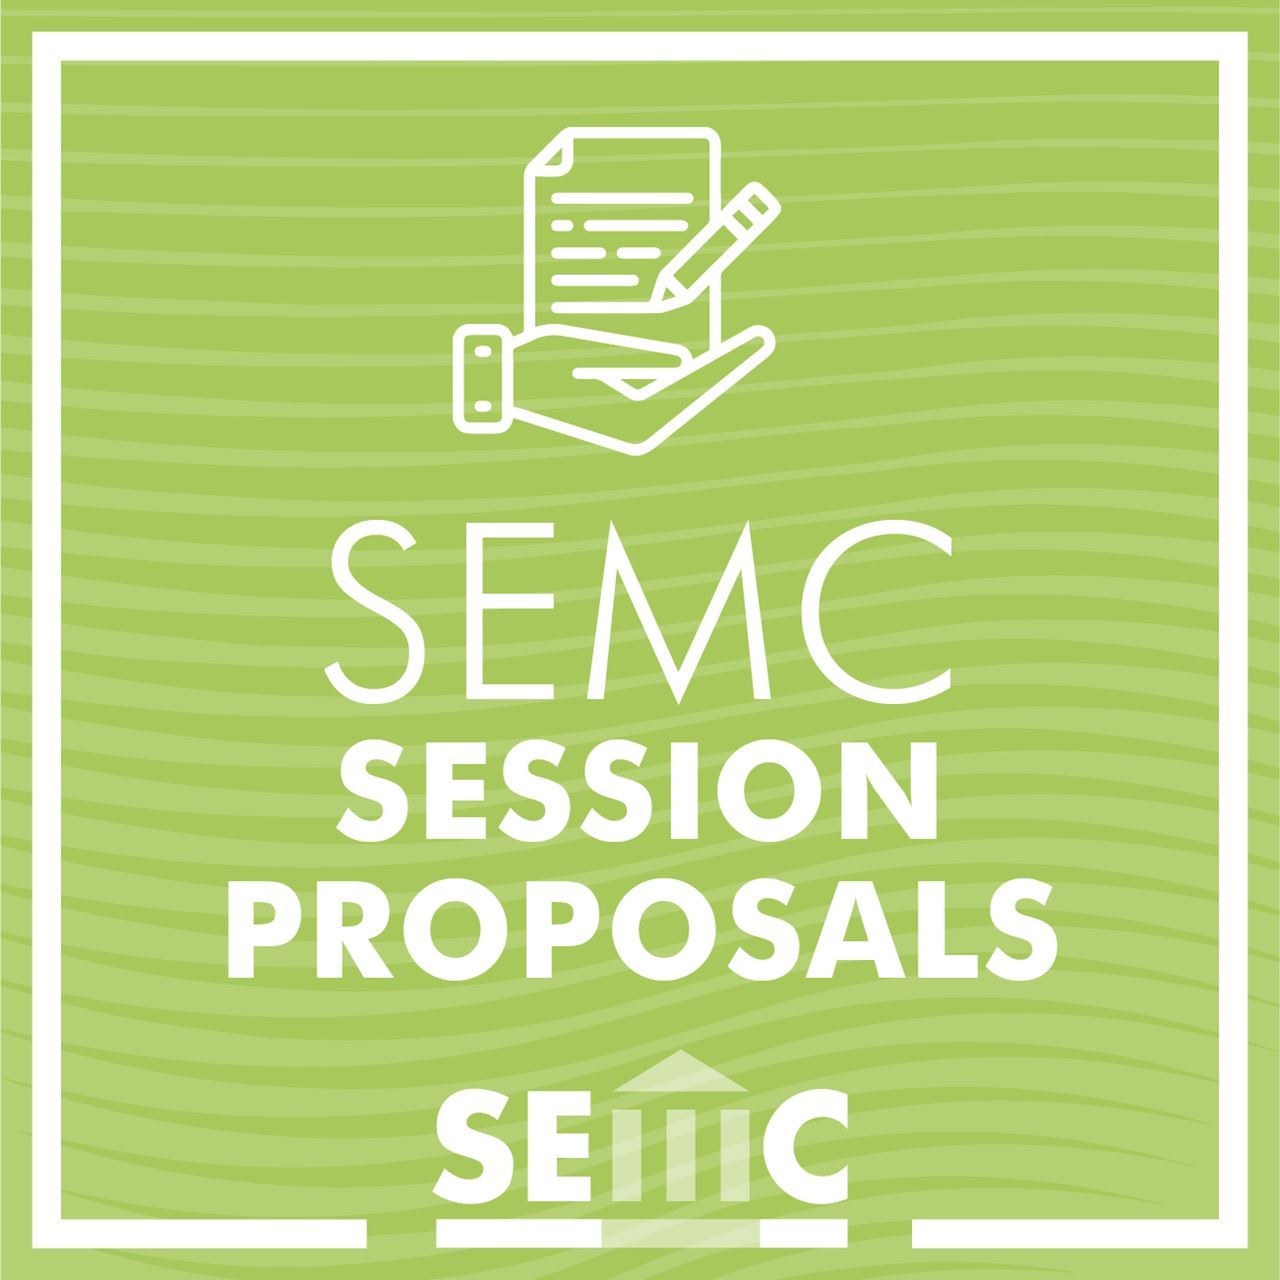 Light green striped background, with a hand holding a piece of paper and pencil. The words “SEMC Session Proposals” are centered. The SEMC logo is also at the bottom. 